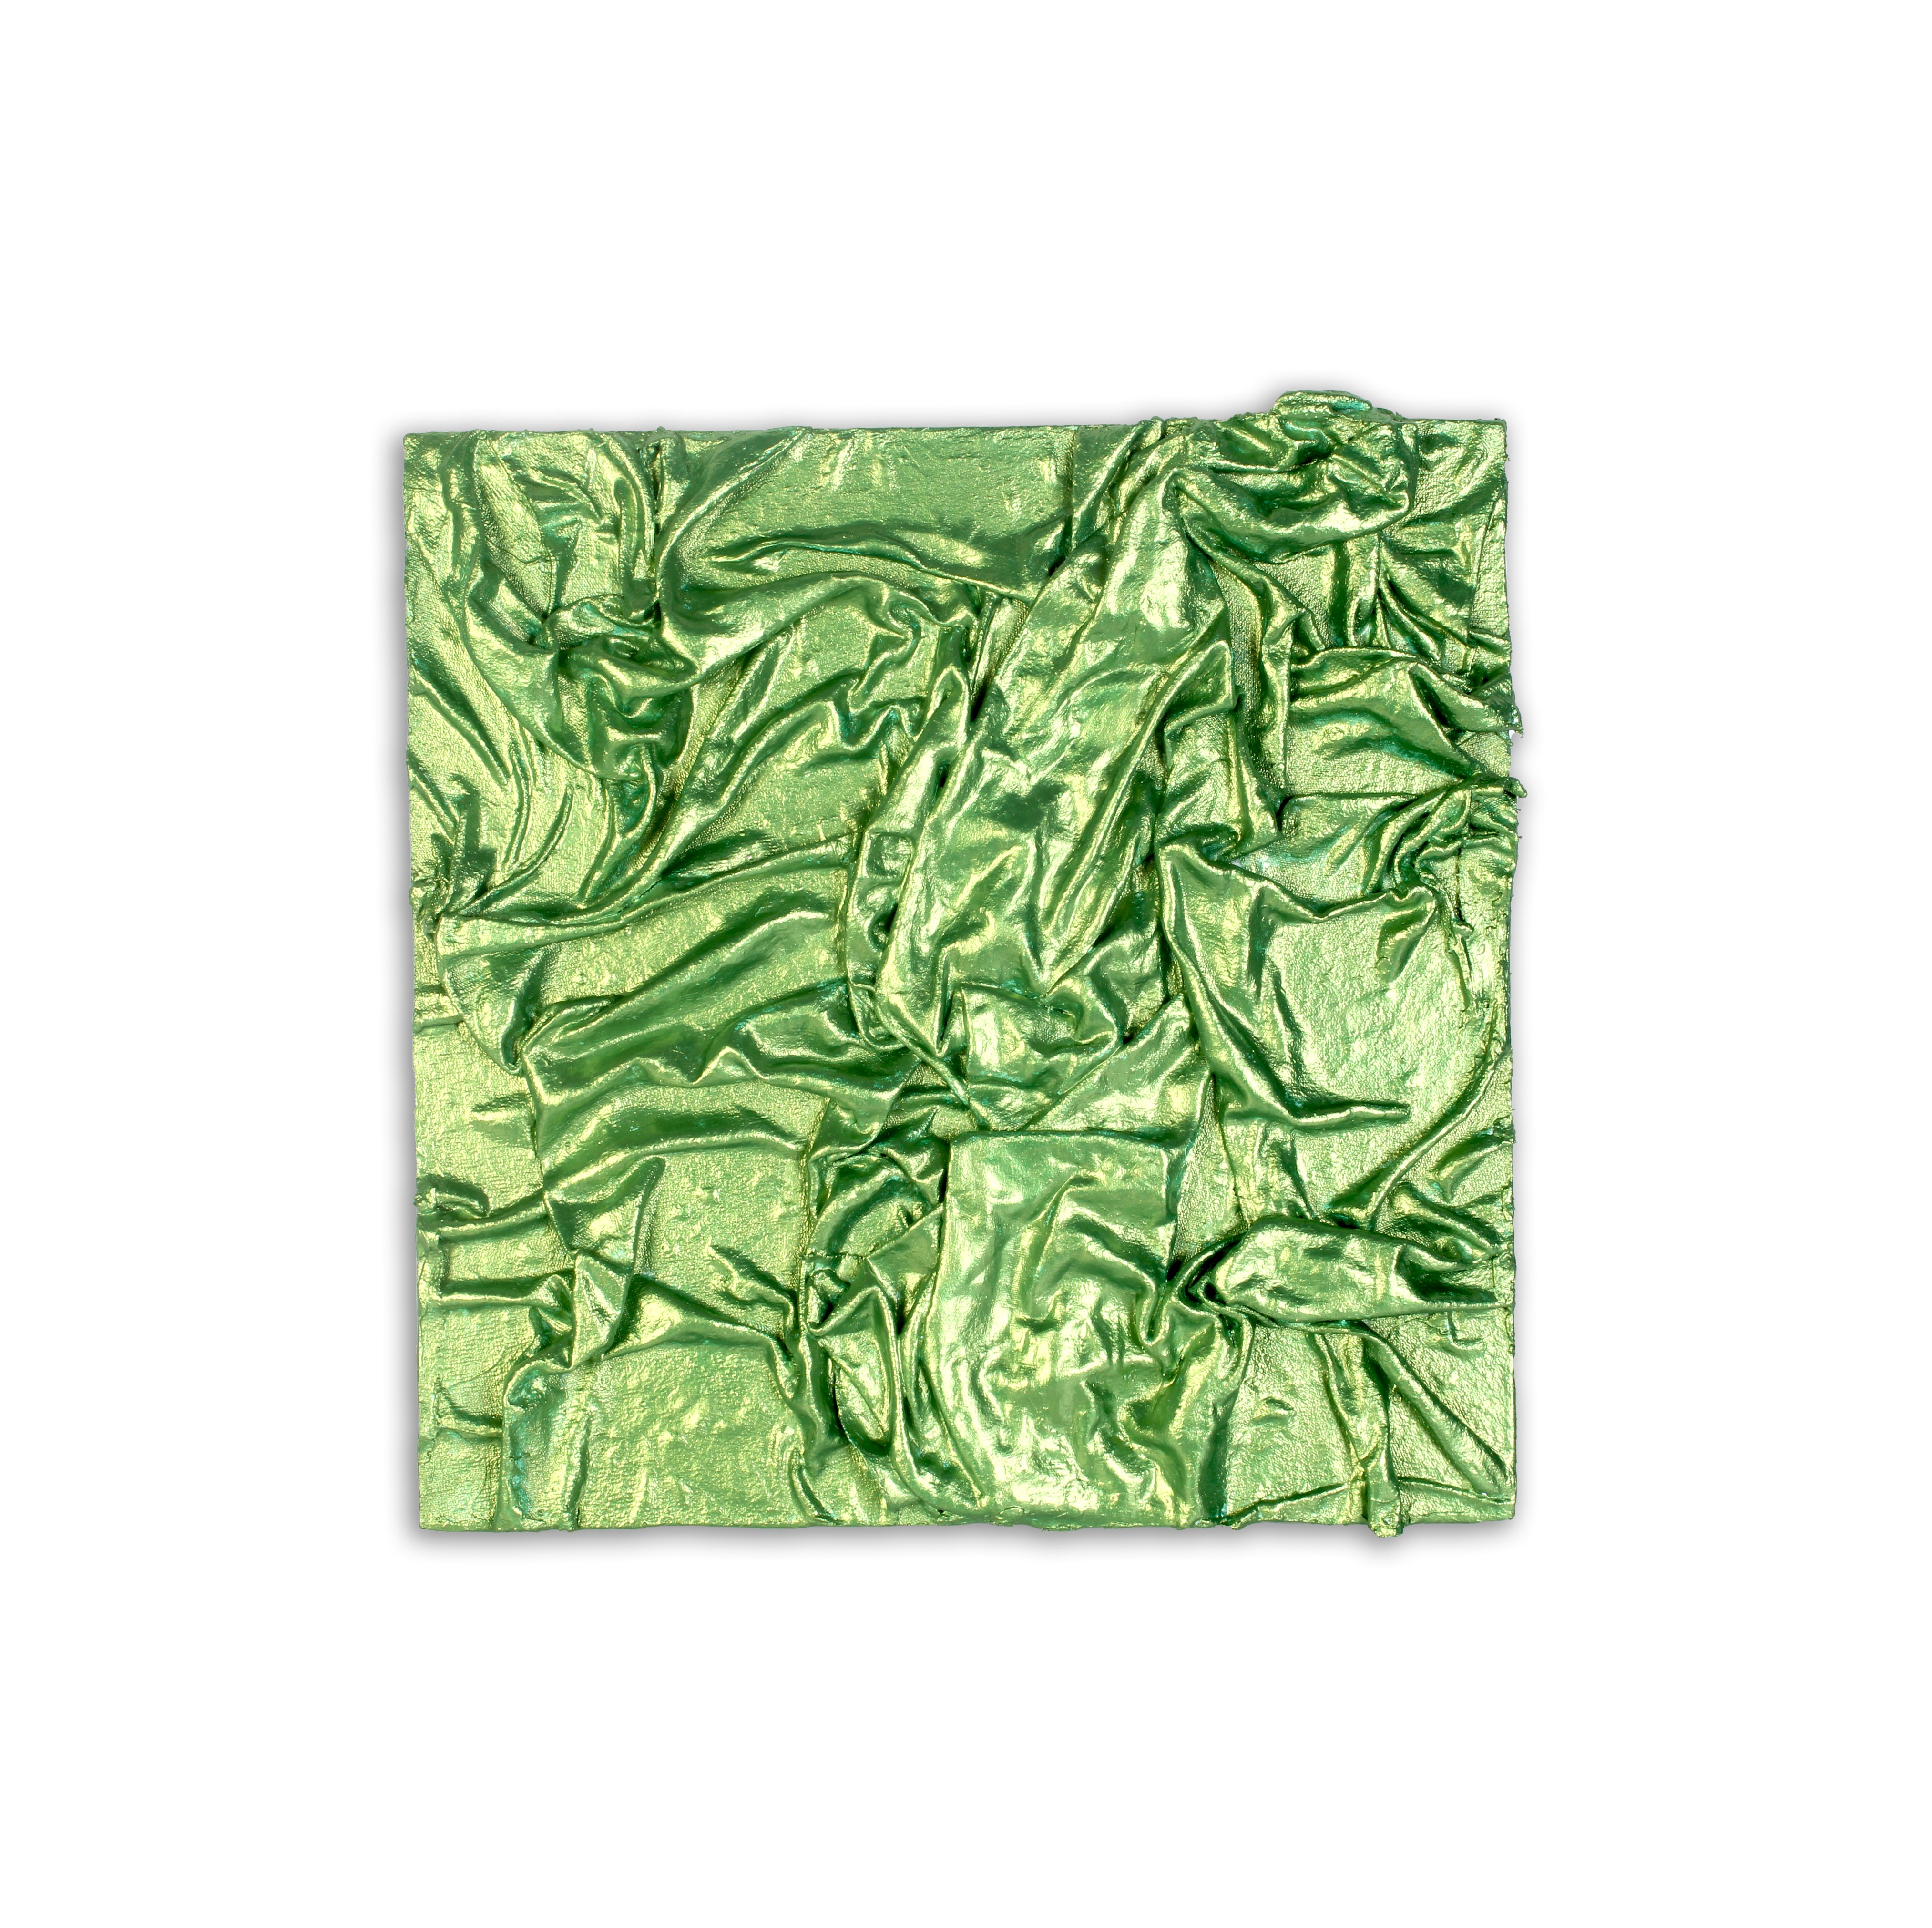 Wall Decor Faux Leather Art Green Sheen Approx H12 X L12 X D0.78inch 1pc